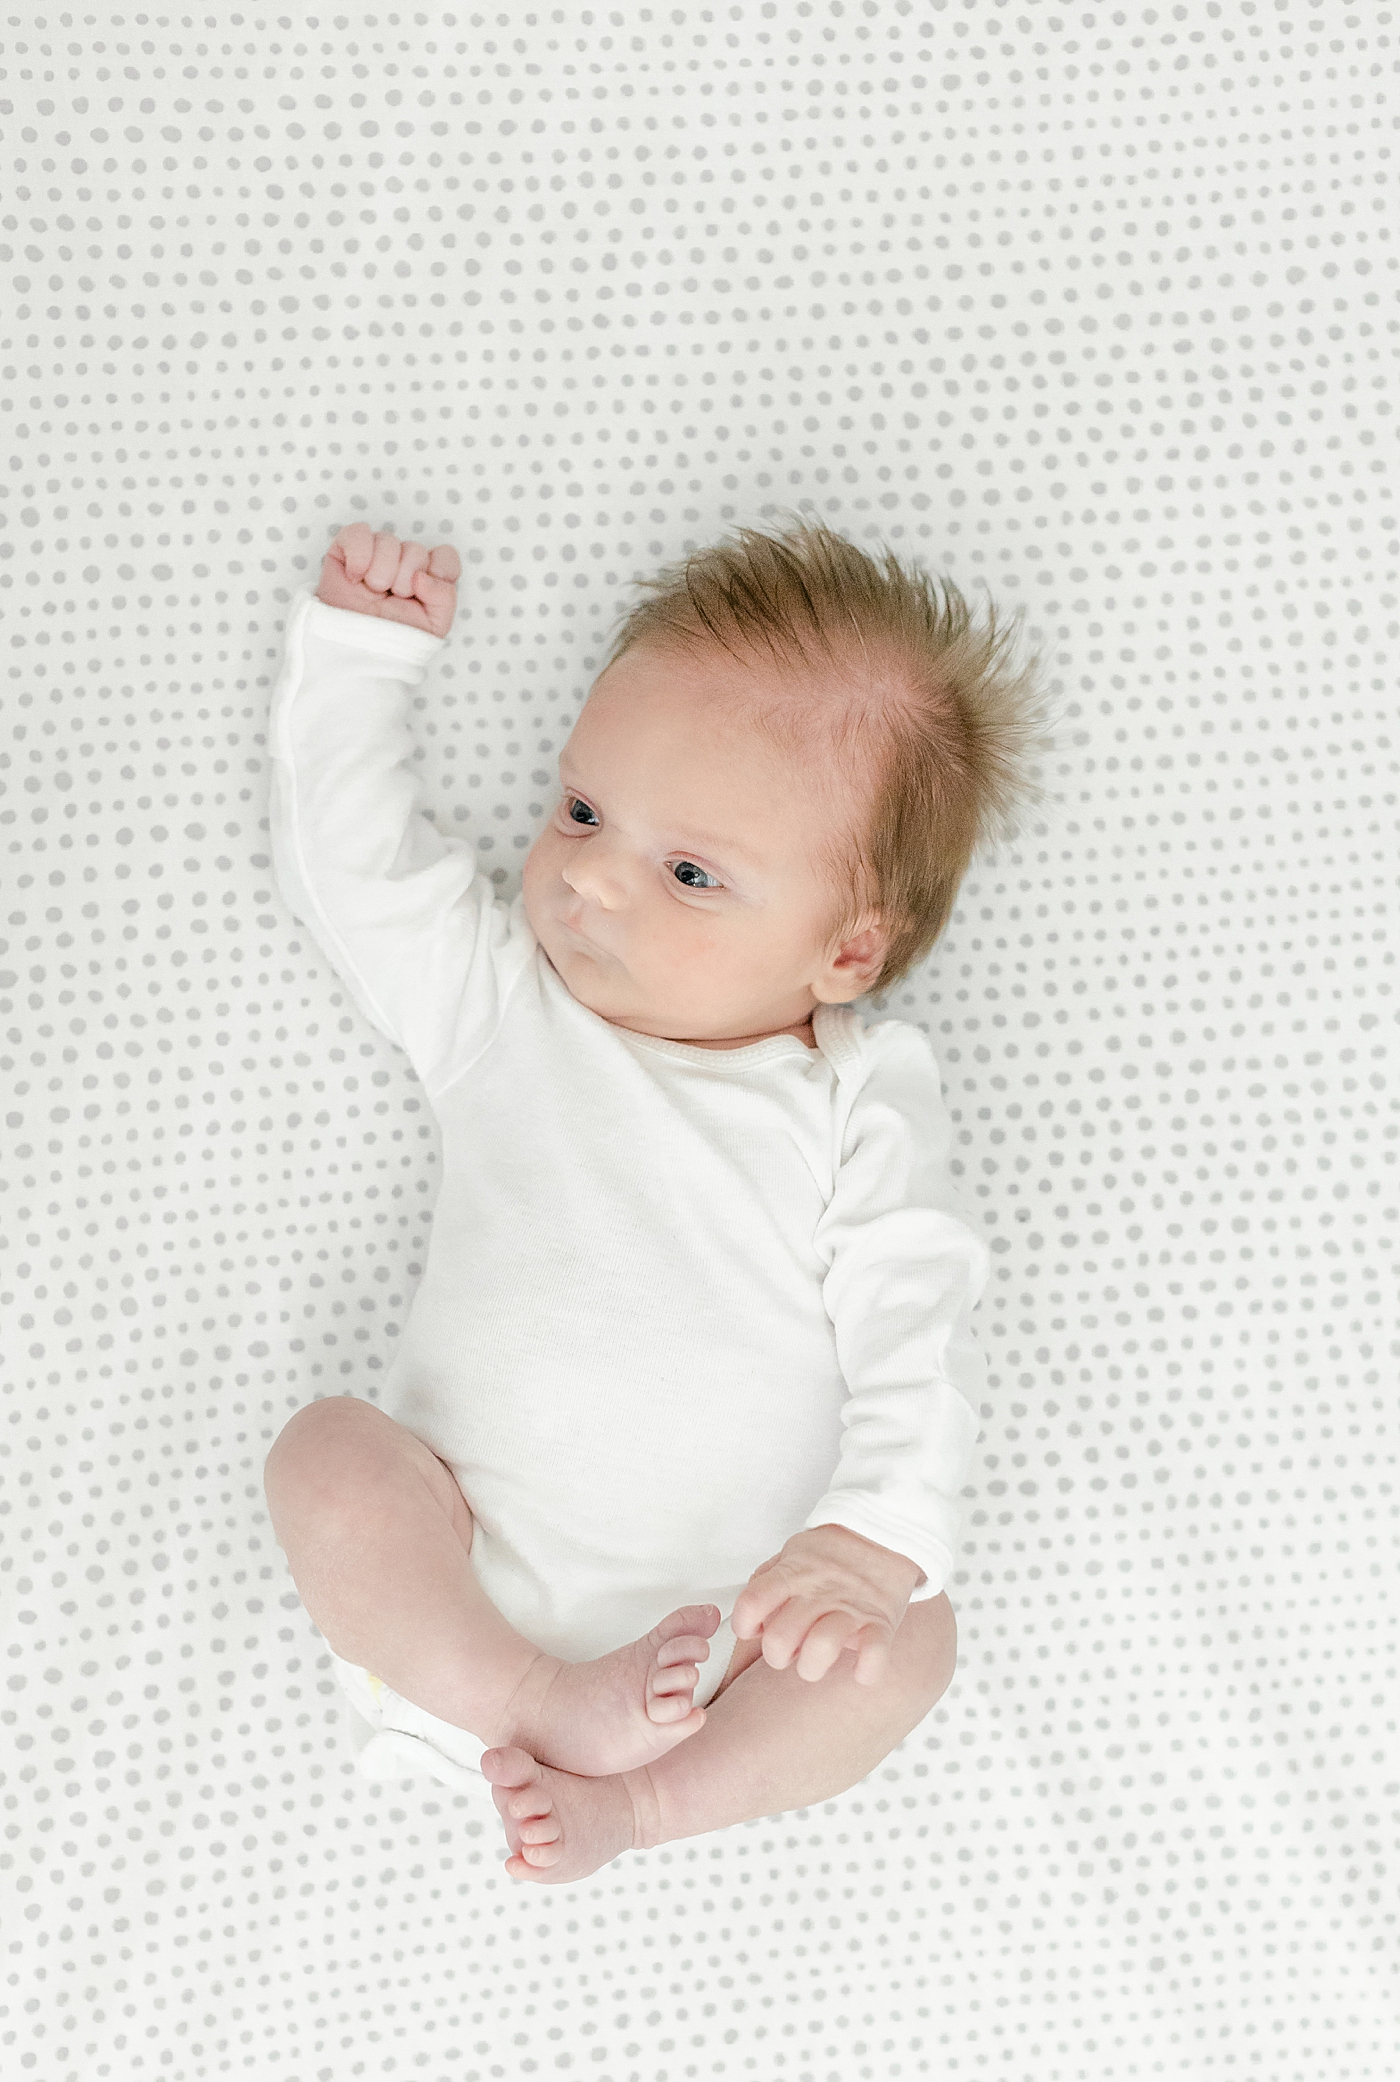 during his Charlotte In Home Newborn Session | Image by Chrissy Winchester 